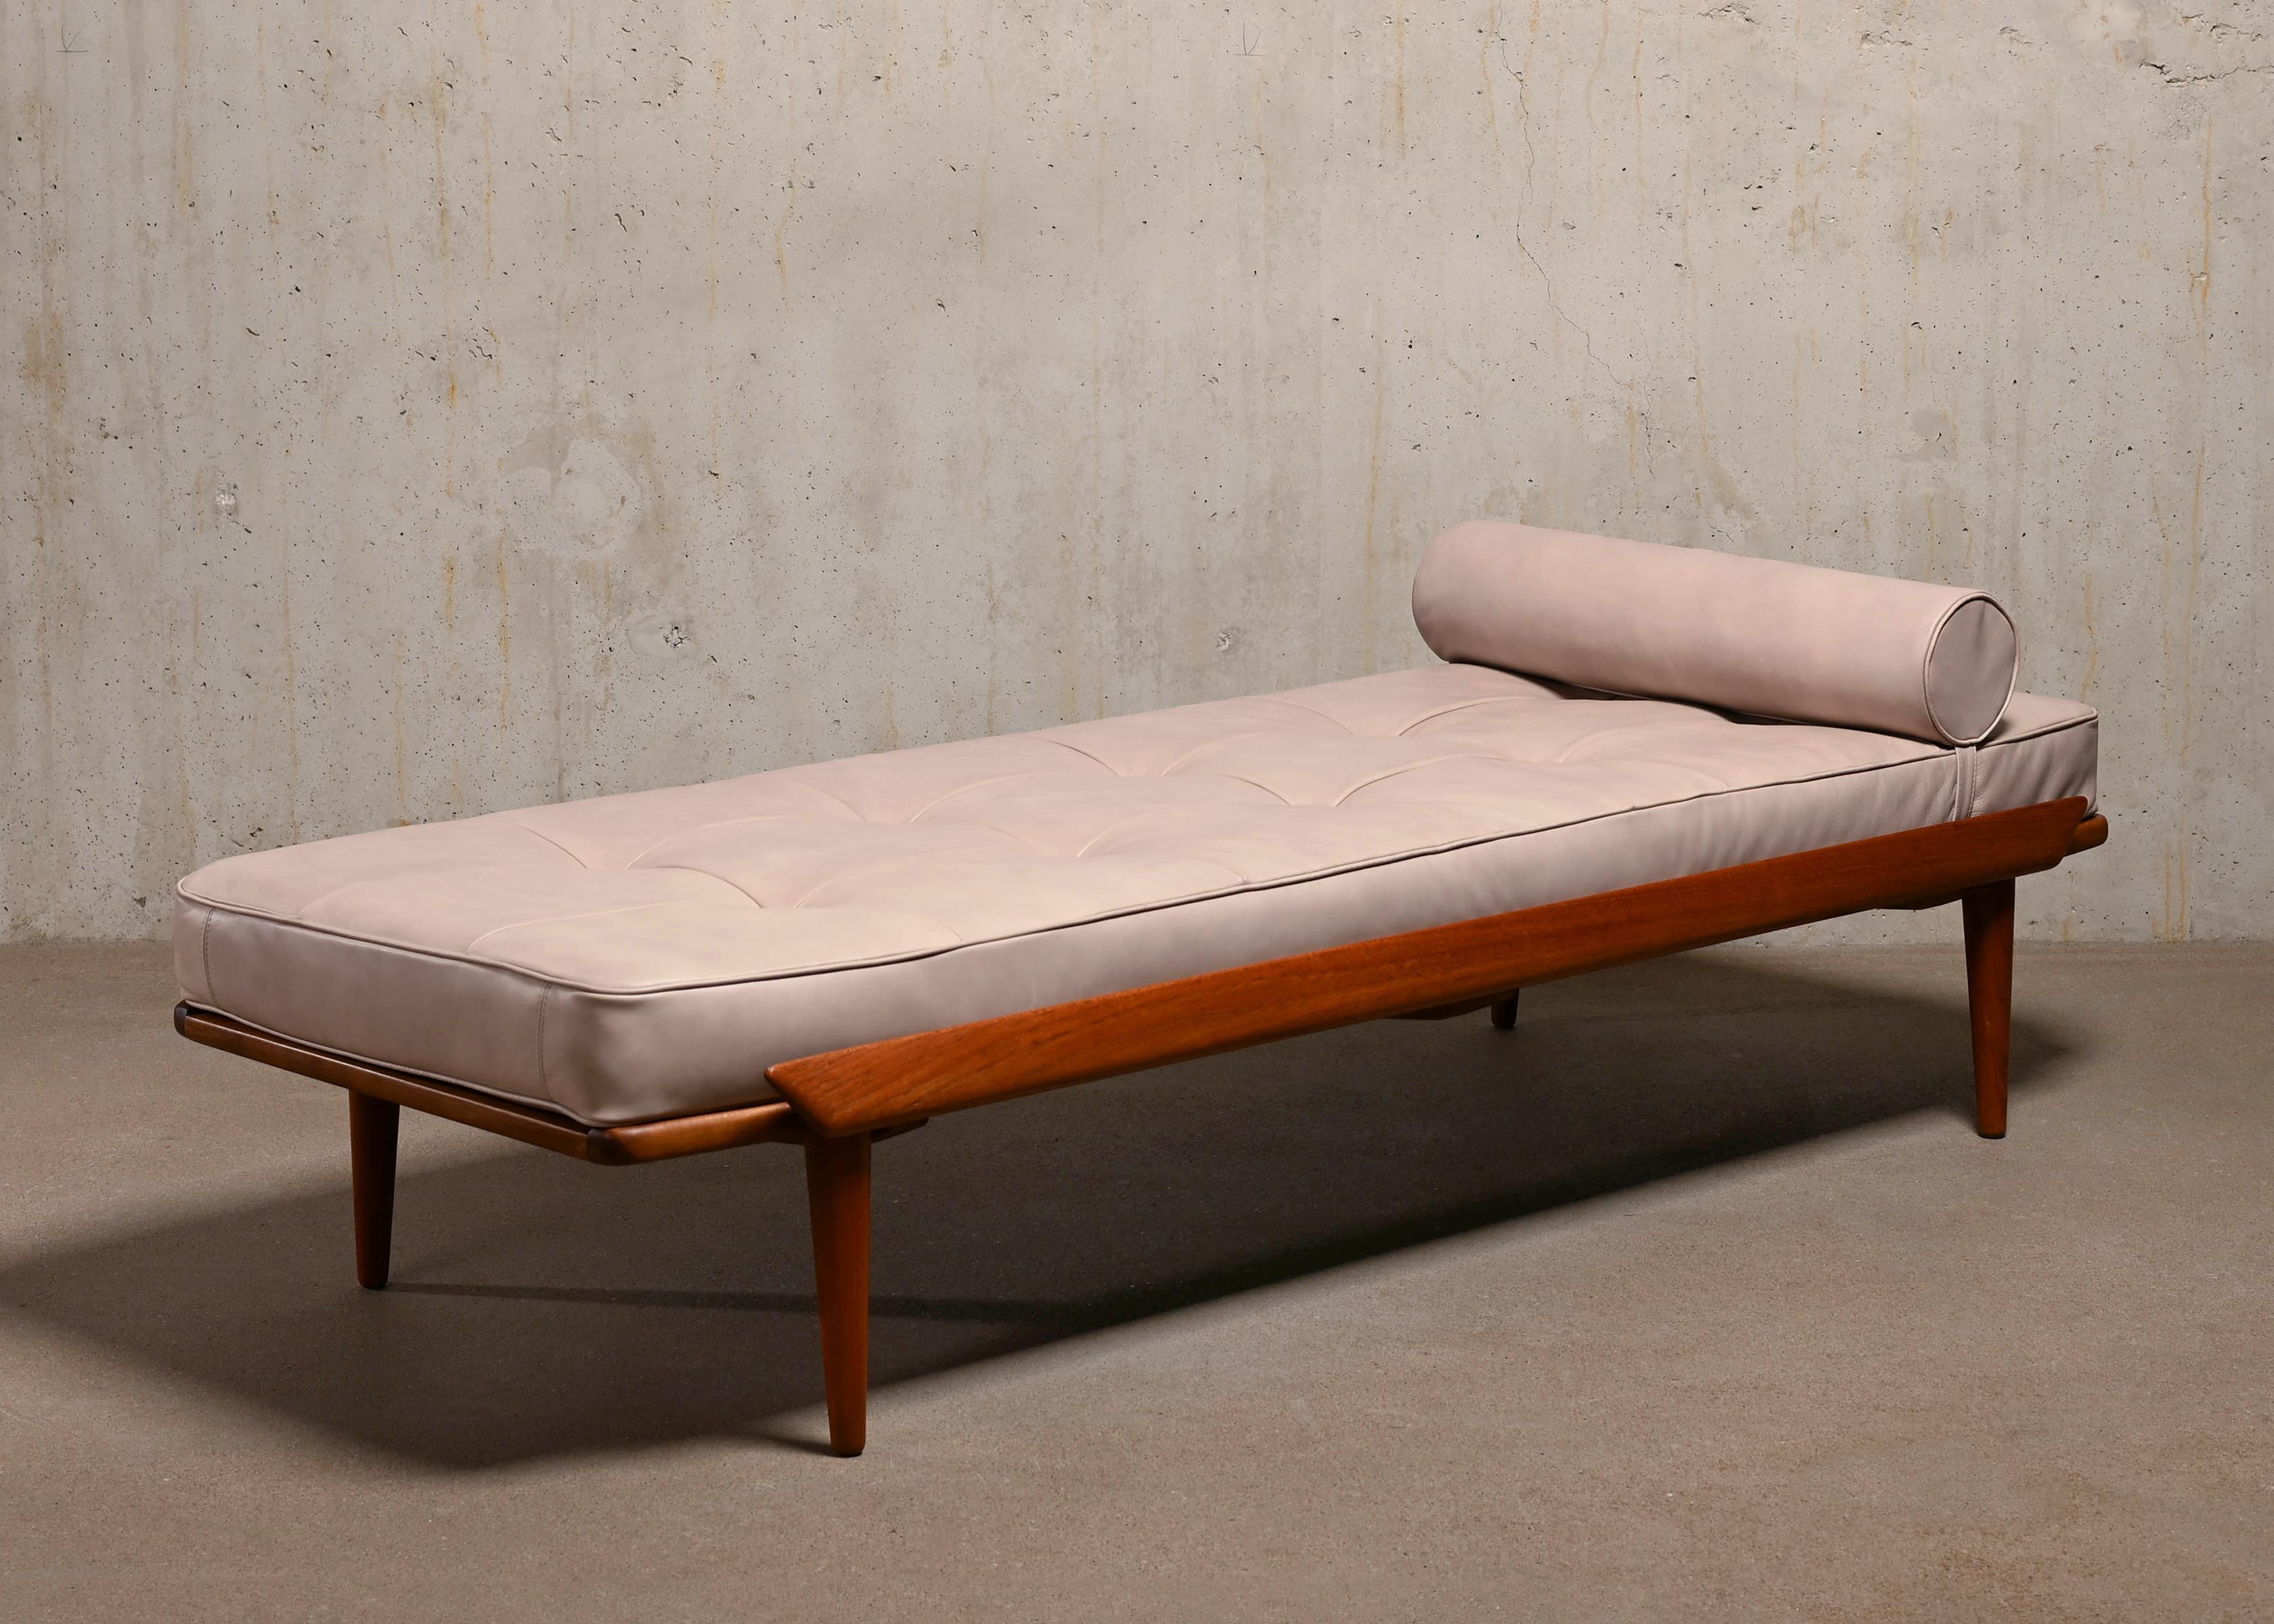 Beuatiful Daybed probably designed by Hvidt & Orla Mølgaard-Nielsen for France & Daverkosen (France & Søn), Denmark. The daybed is made of solid wood with teak side skirts and legs. The side skirts are curved and have pointed ends, typical for that